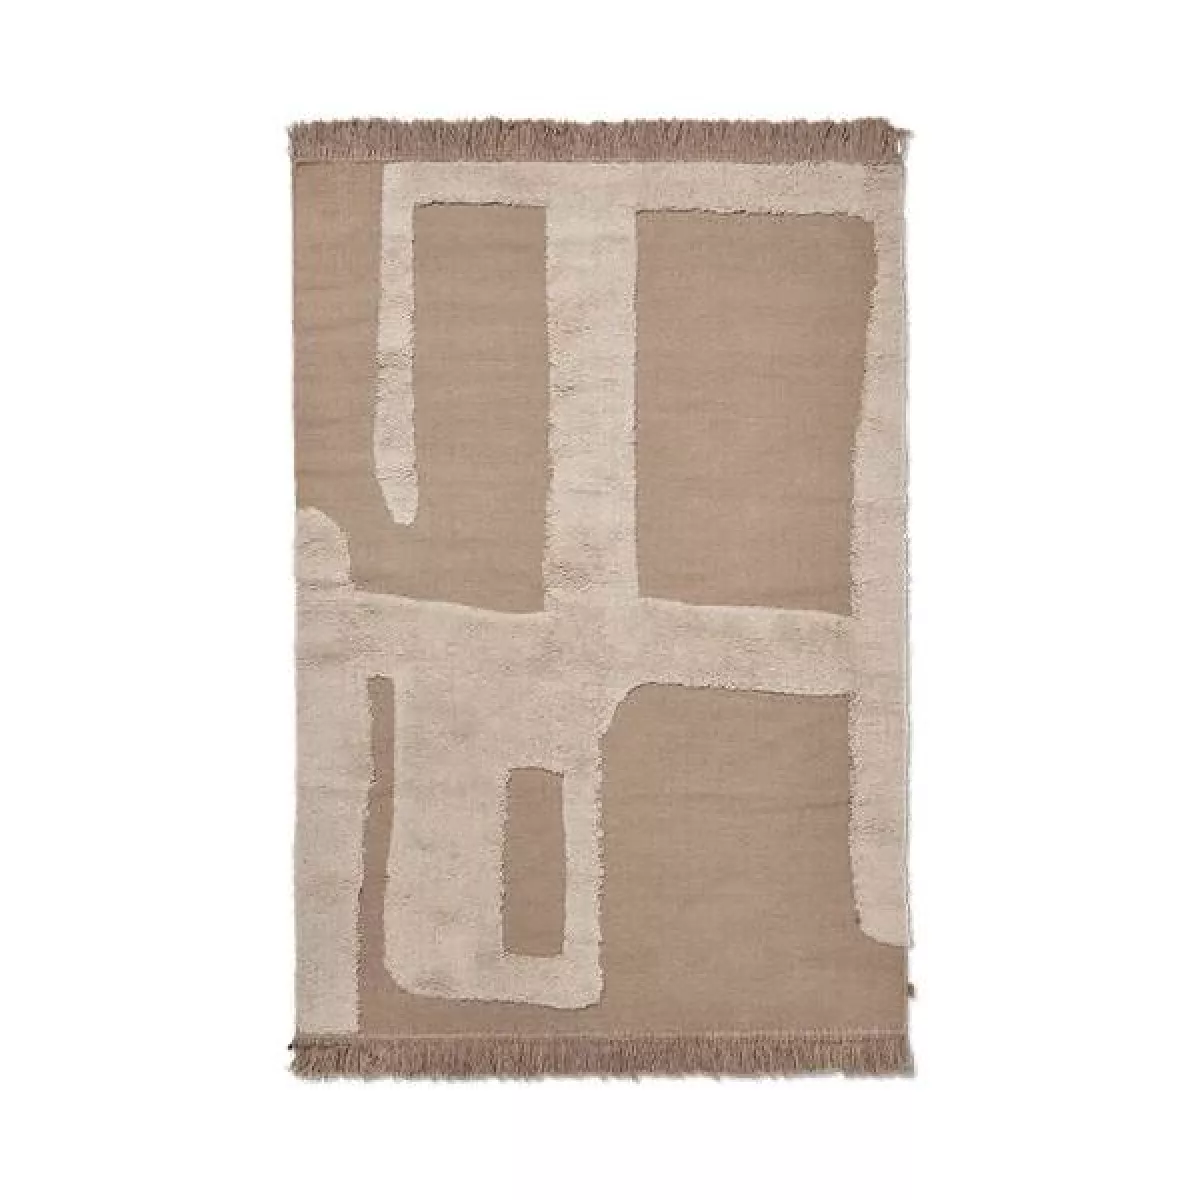 #1 - Ferm Living Alley Wool Rug - Natural